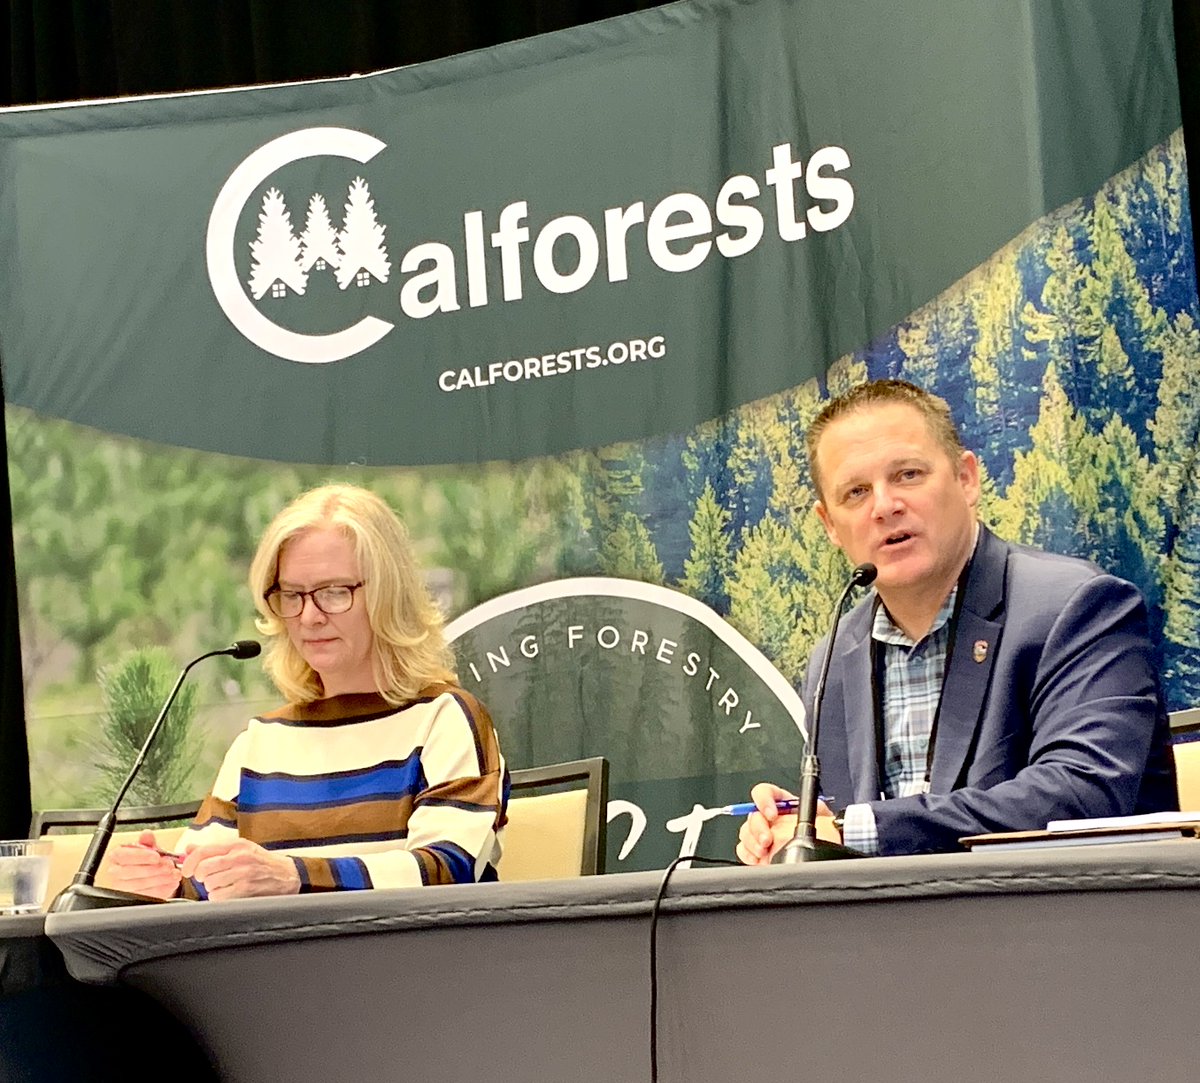 Today, my @usfs_r5 colleague Jennifer Eberlien and I kicked off the @CalForests Conference with a Q & A about the outlook for our state’s forests. We covered wildfire response, fuels reduction, new tools, and the workforce development needed for progress. @CAL_FIRE